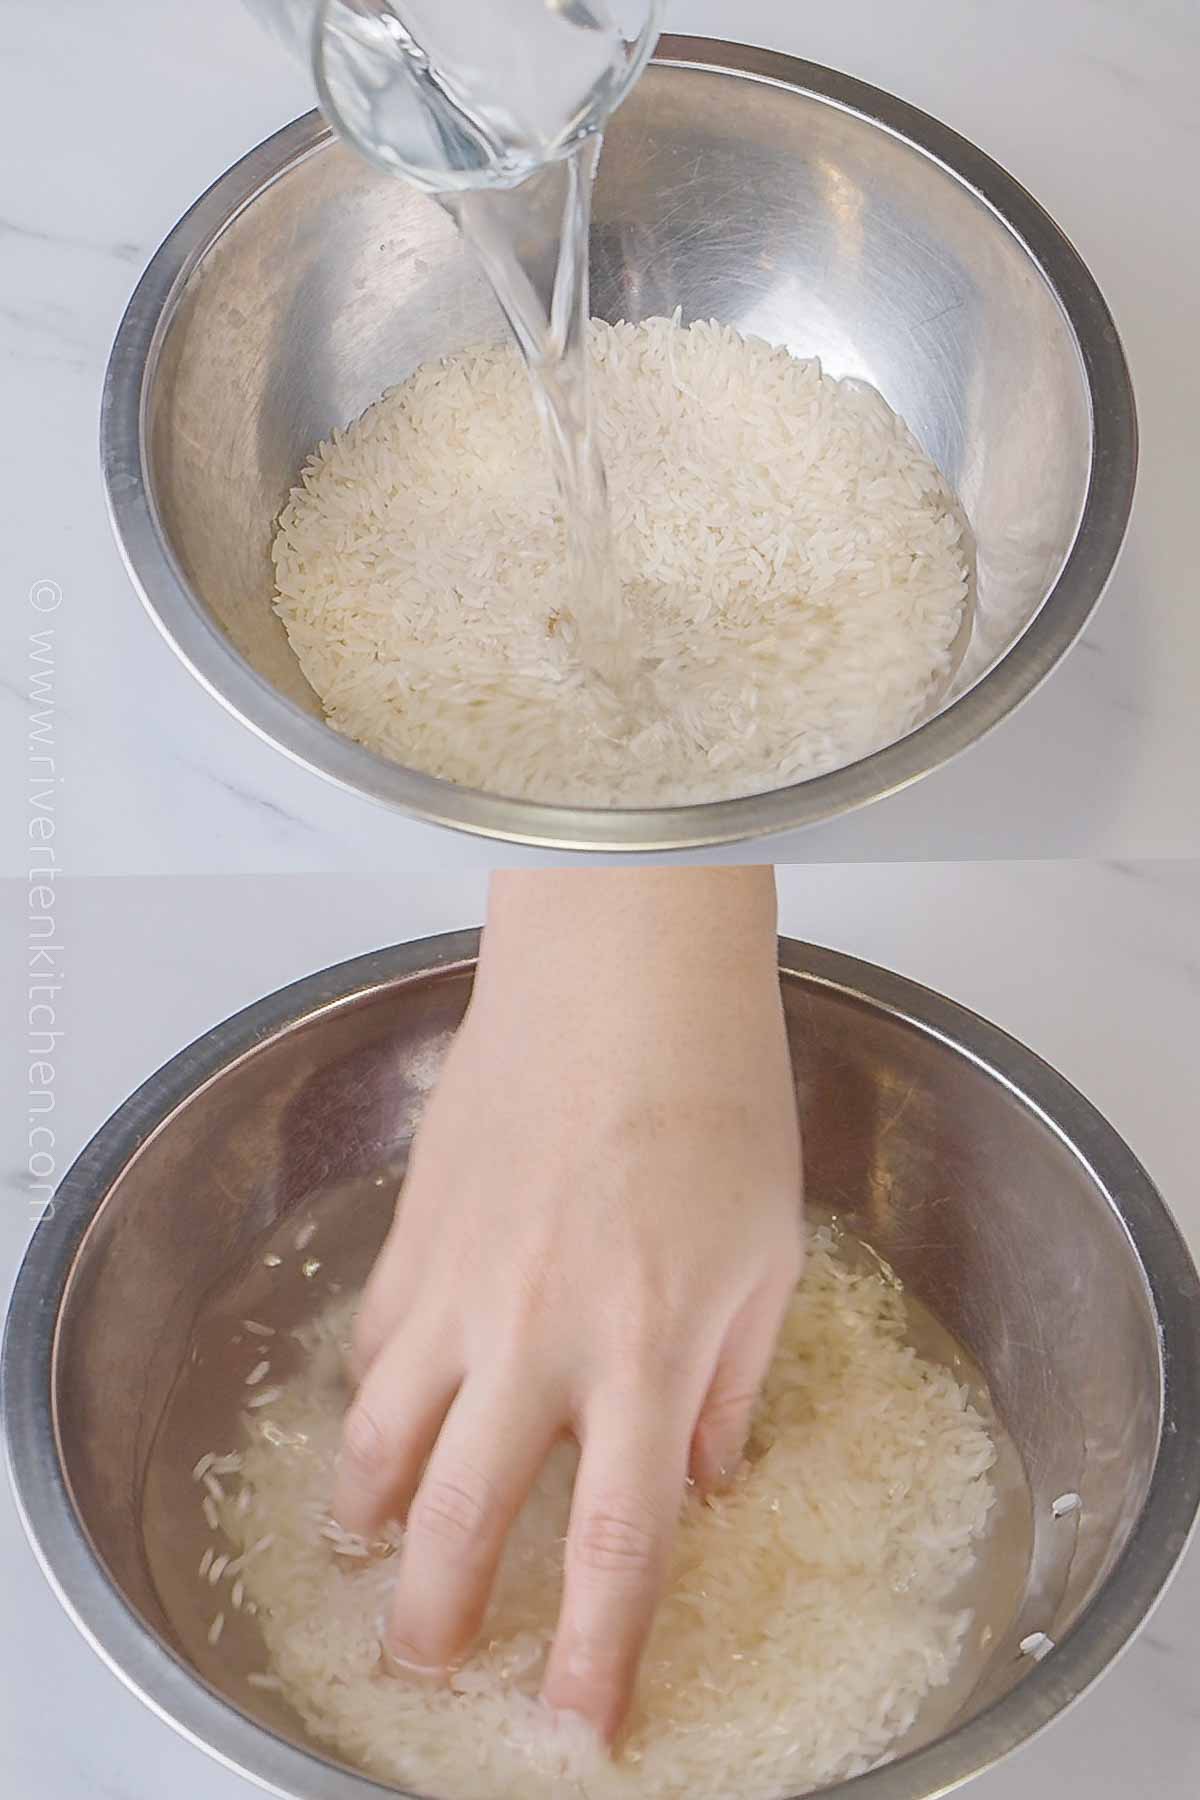 wash rice before cooking